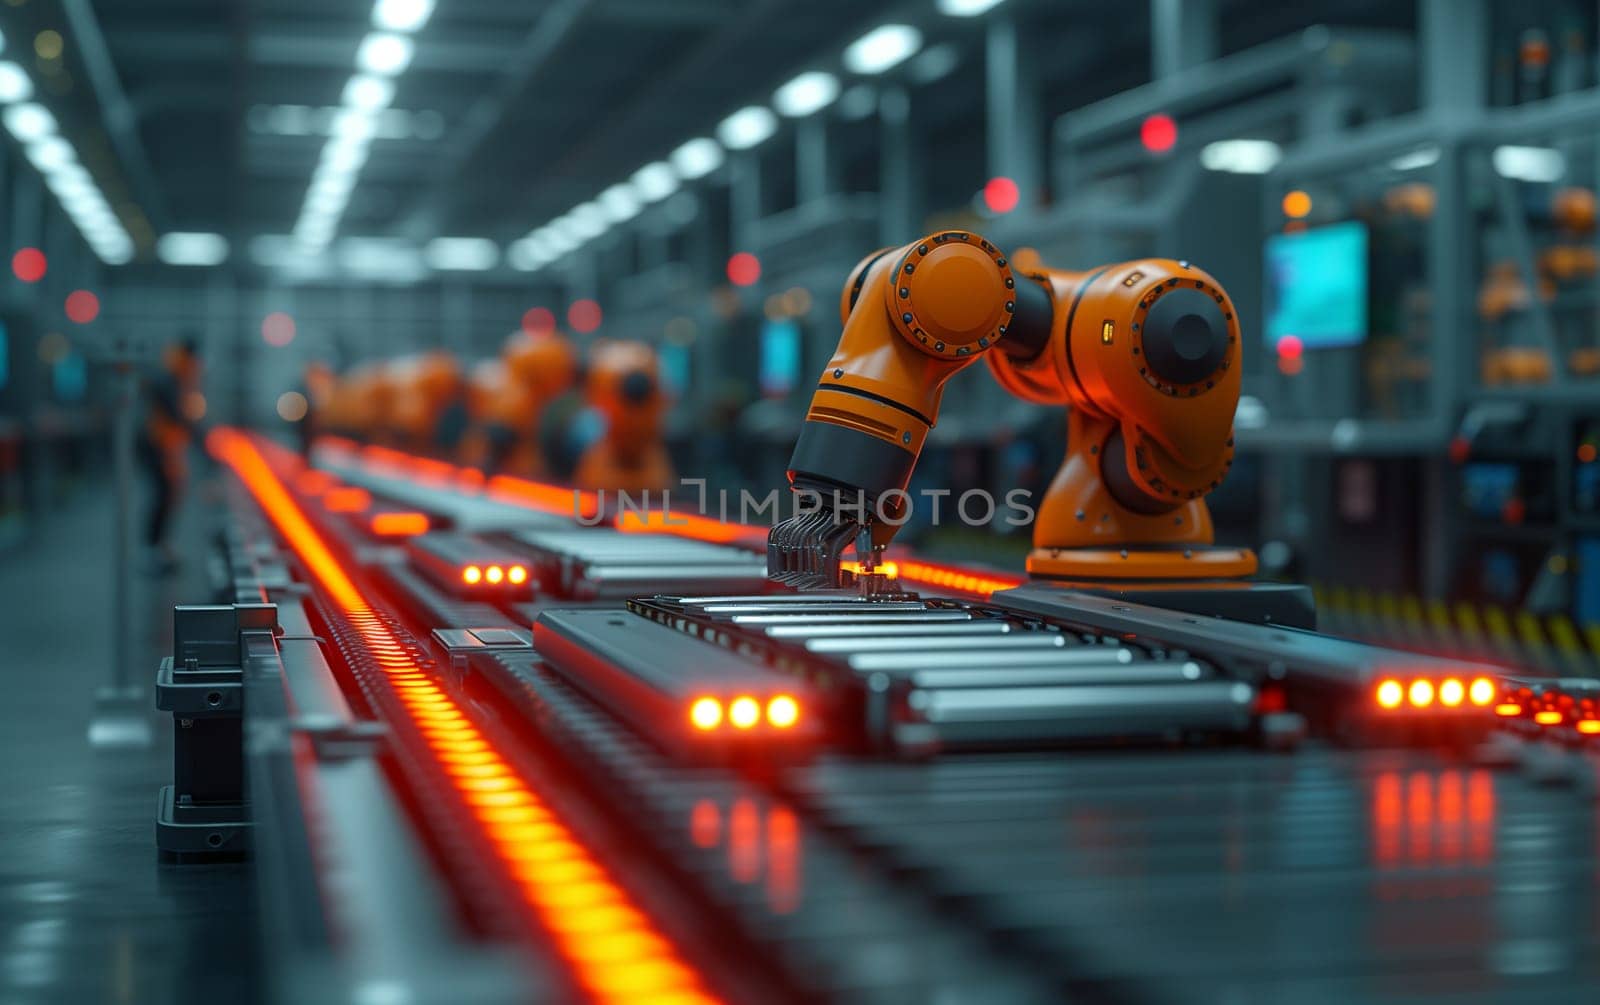 An automated conveyor belt in the factory moves robots made of composite material along the production line, showcasing the integration of engineering and industry